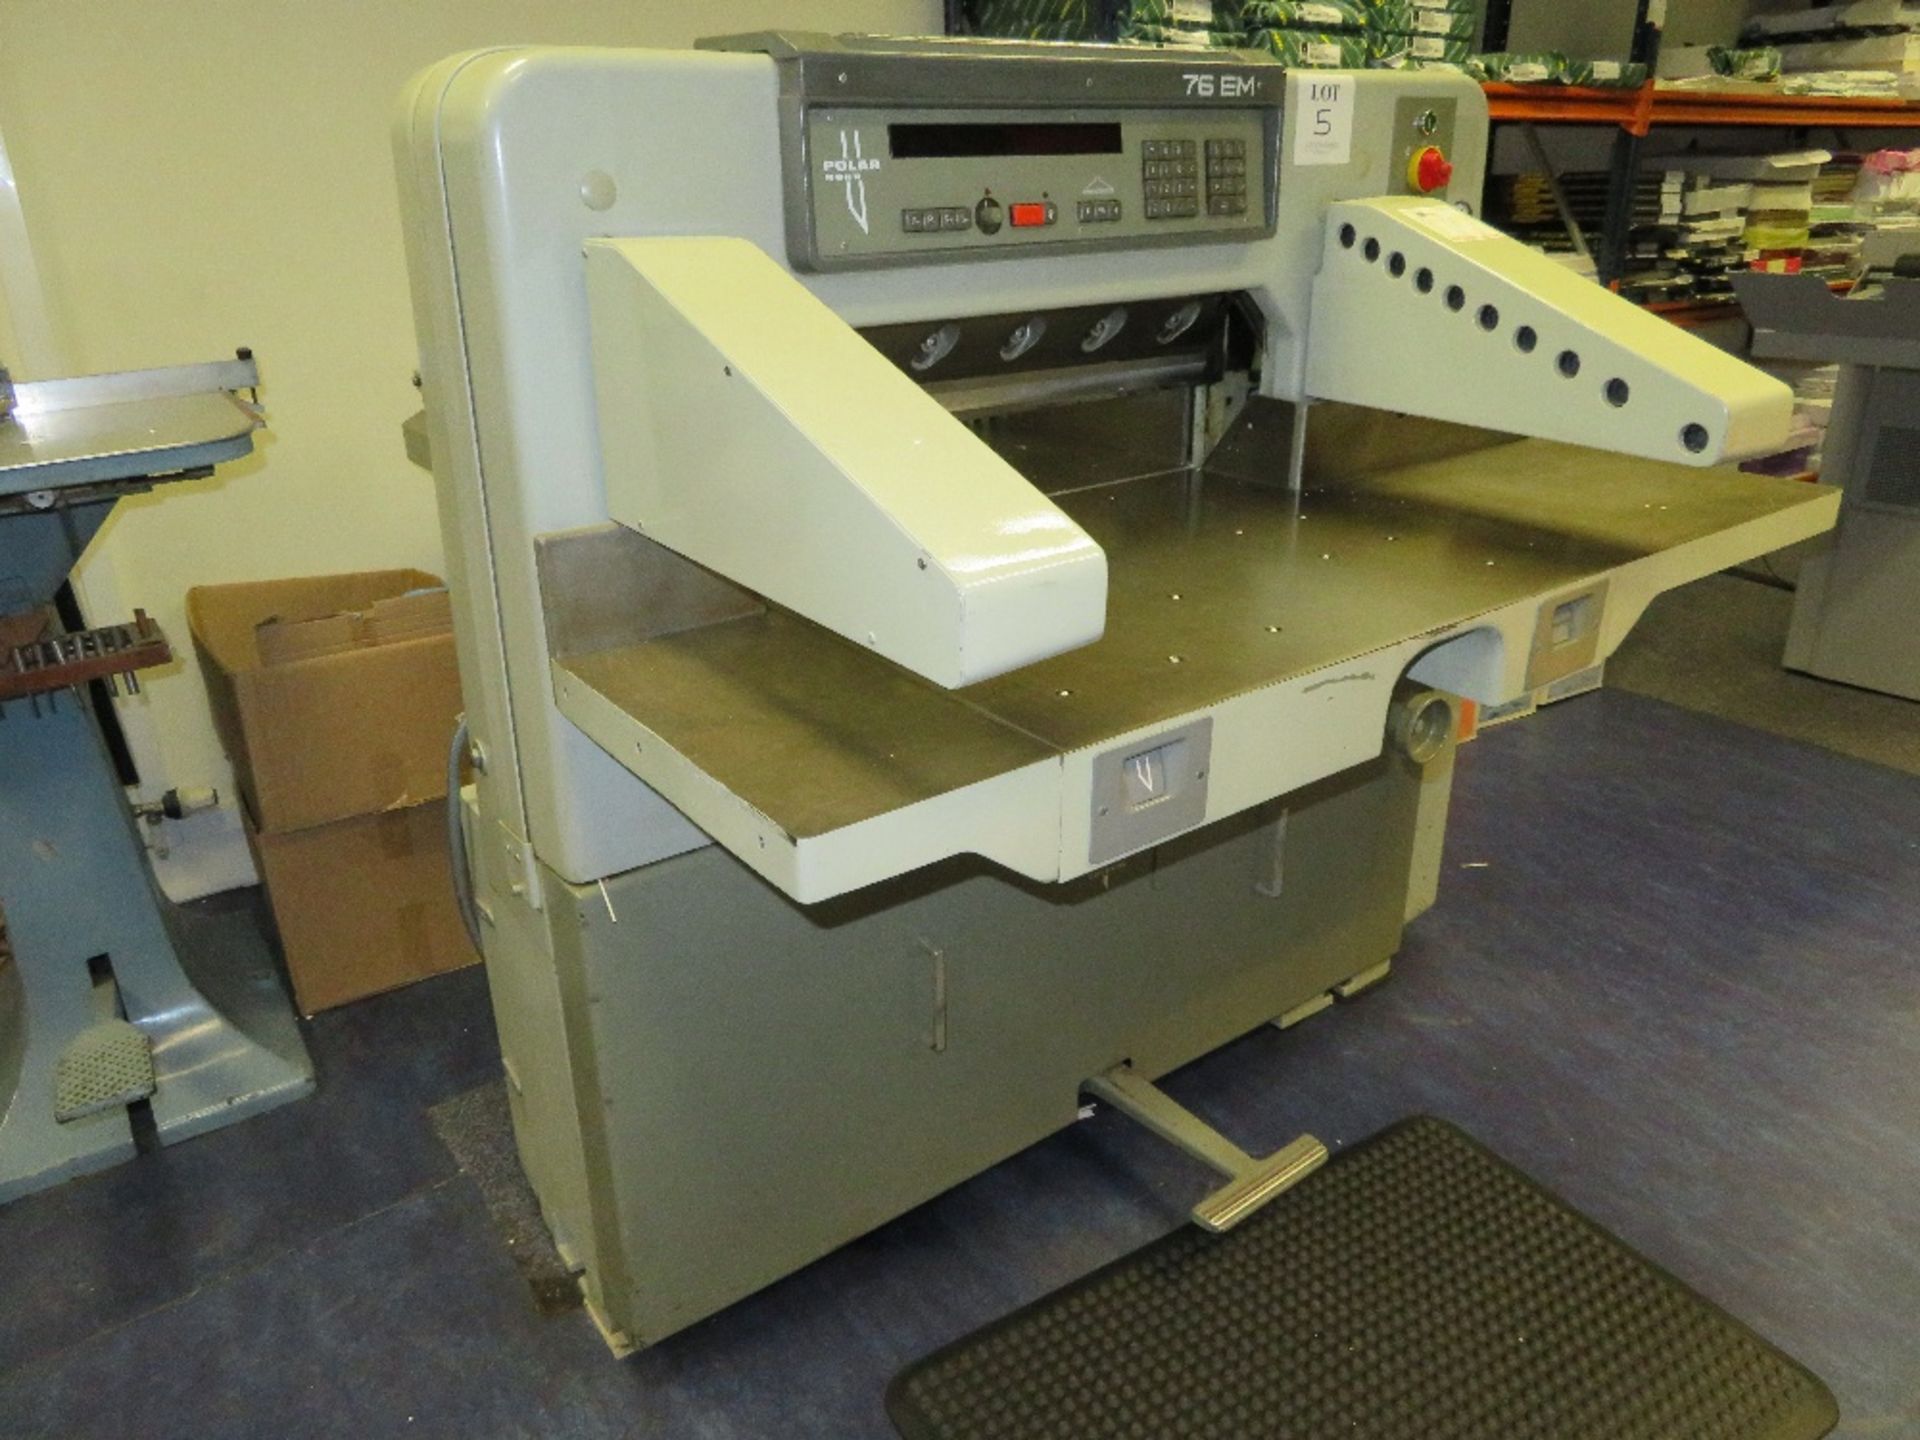 Polar Mohr 76 EM Paper Guillotine, Serial Number 5661976 with Light Guards and 4x Spare Blades - Image 2 of 8